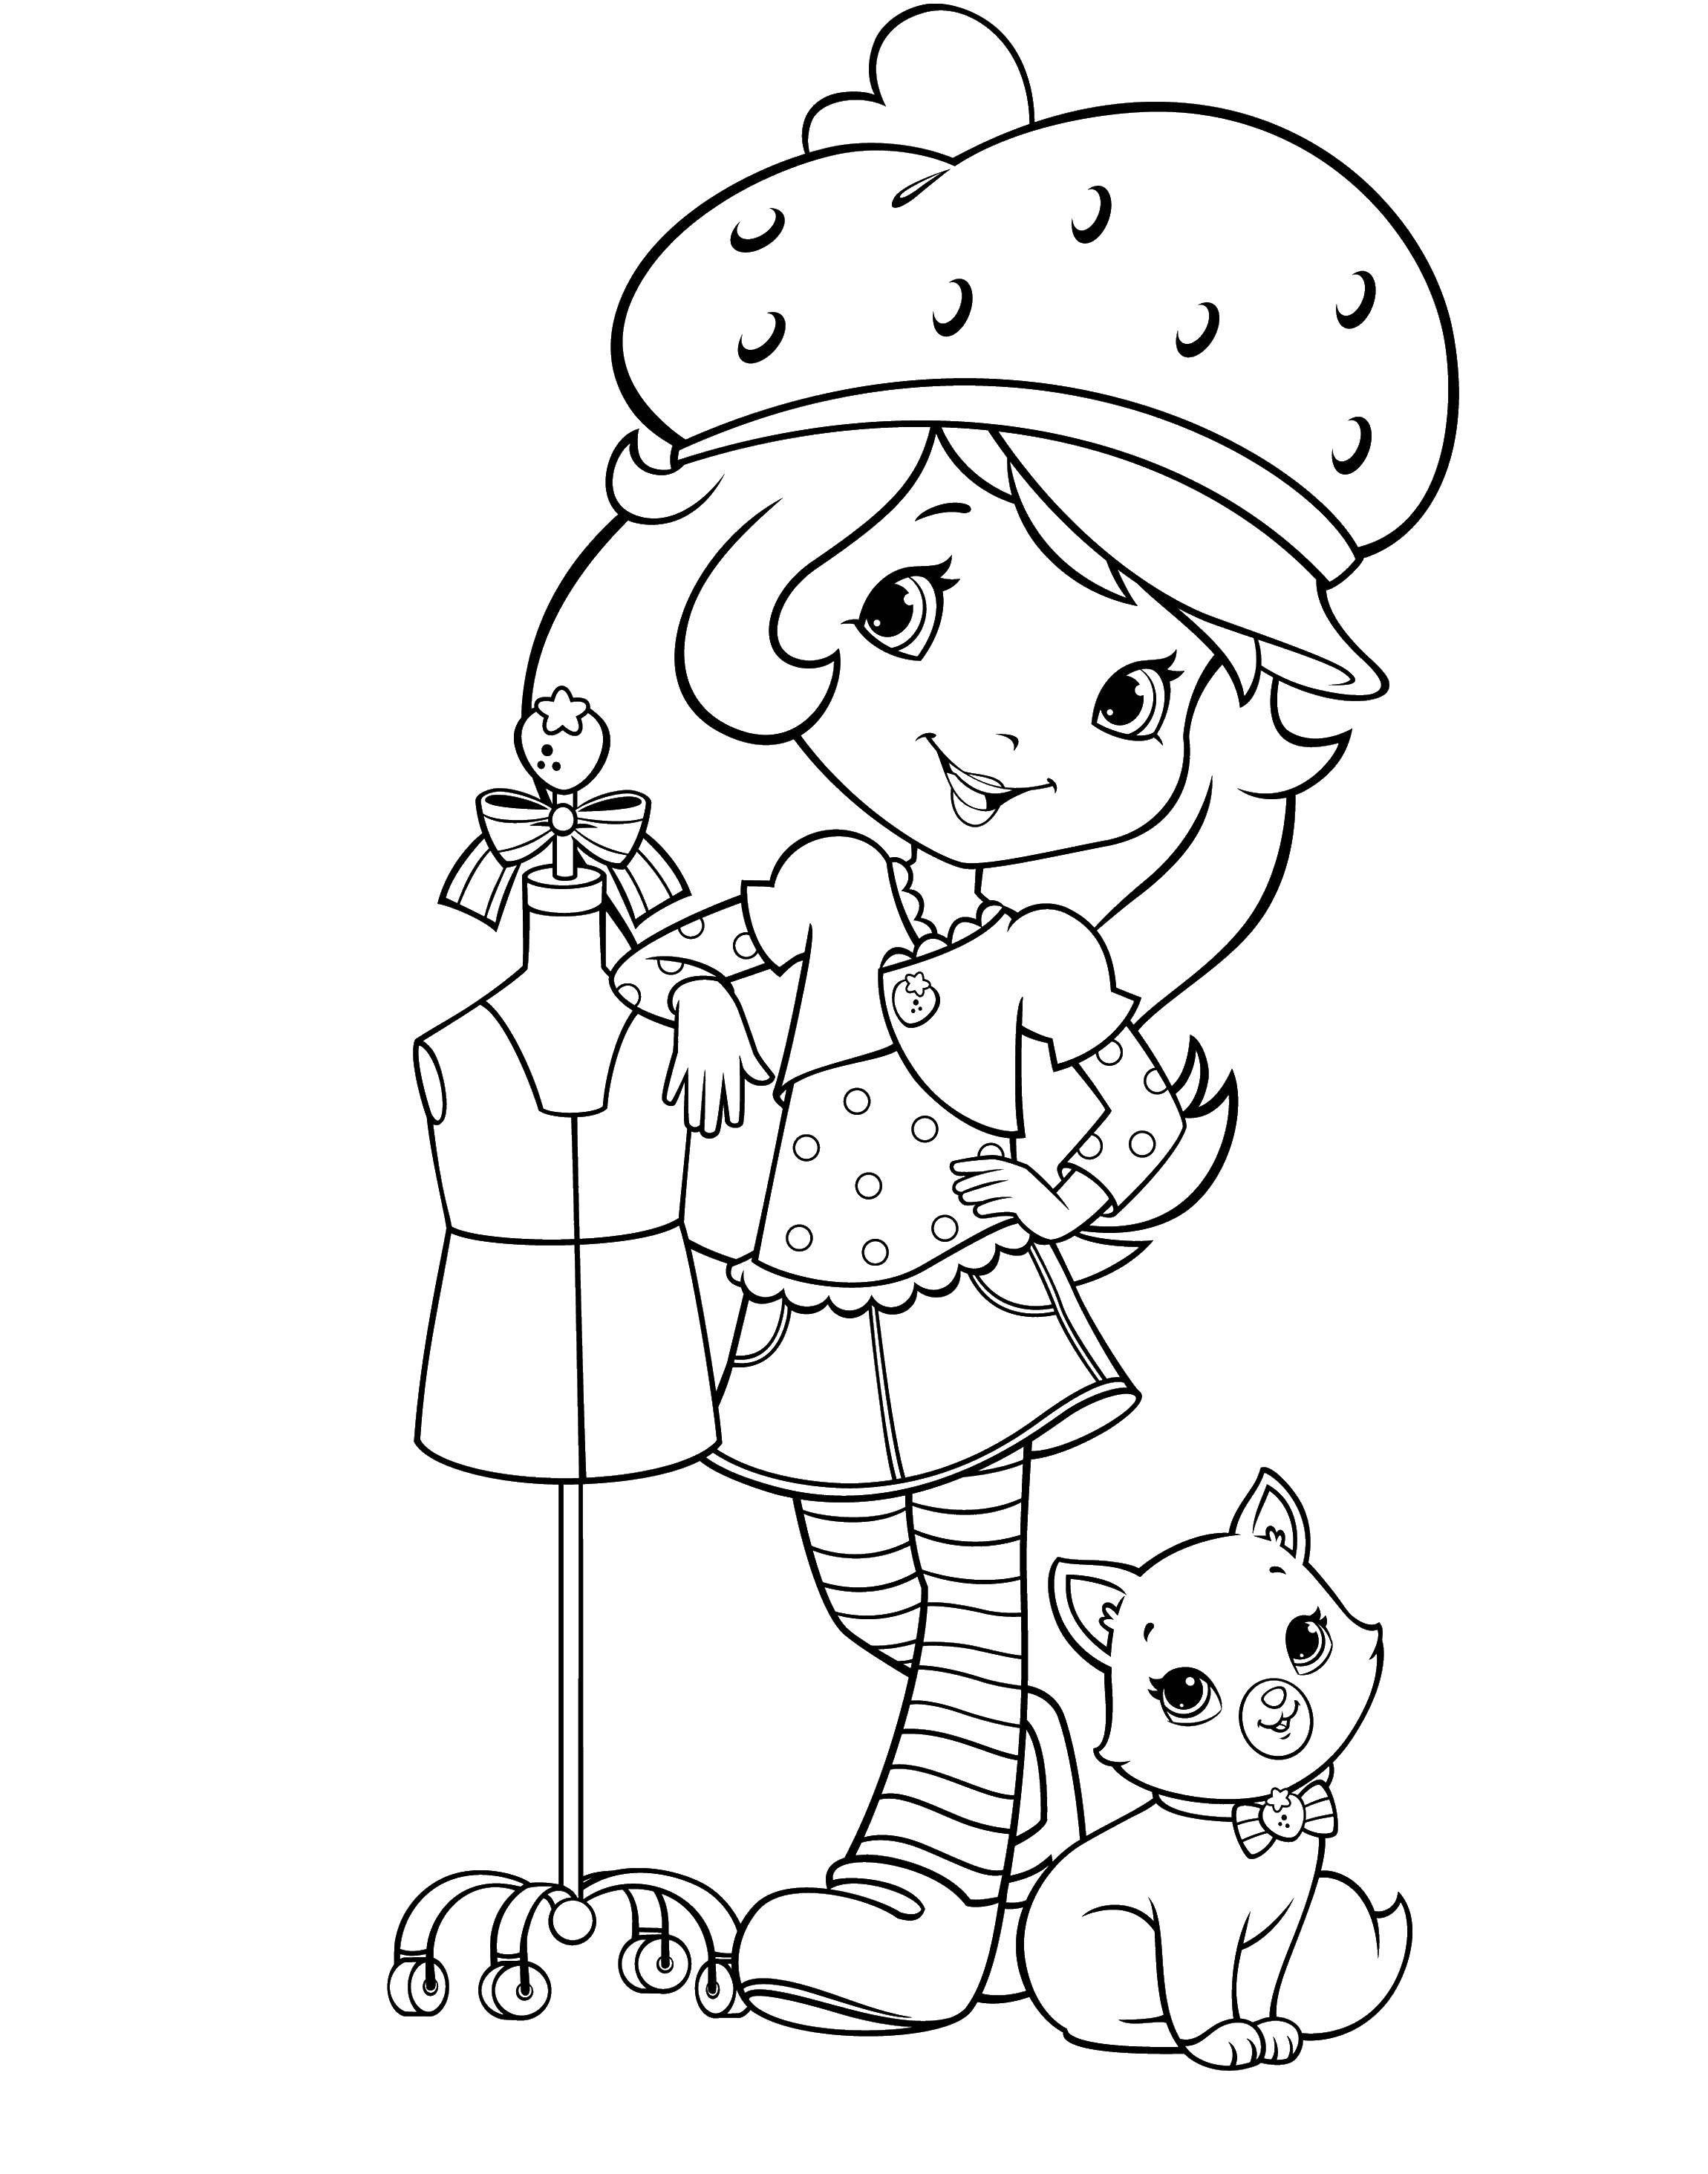 Coloring Strawberry Charlotte with cat. Category coloring pages for girls. Tags:  Charlotte, cartoon.